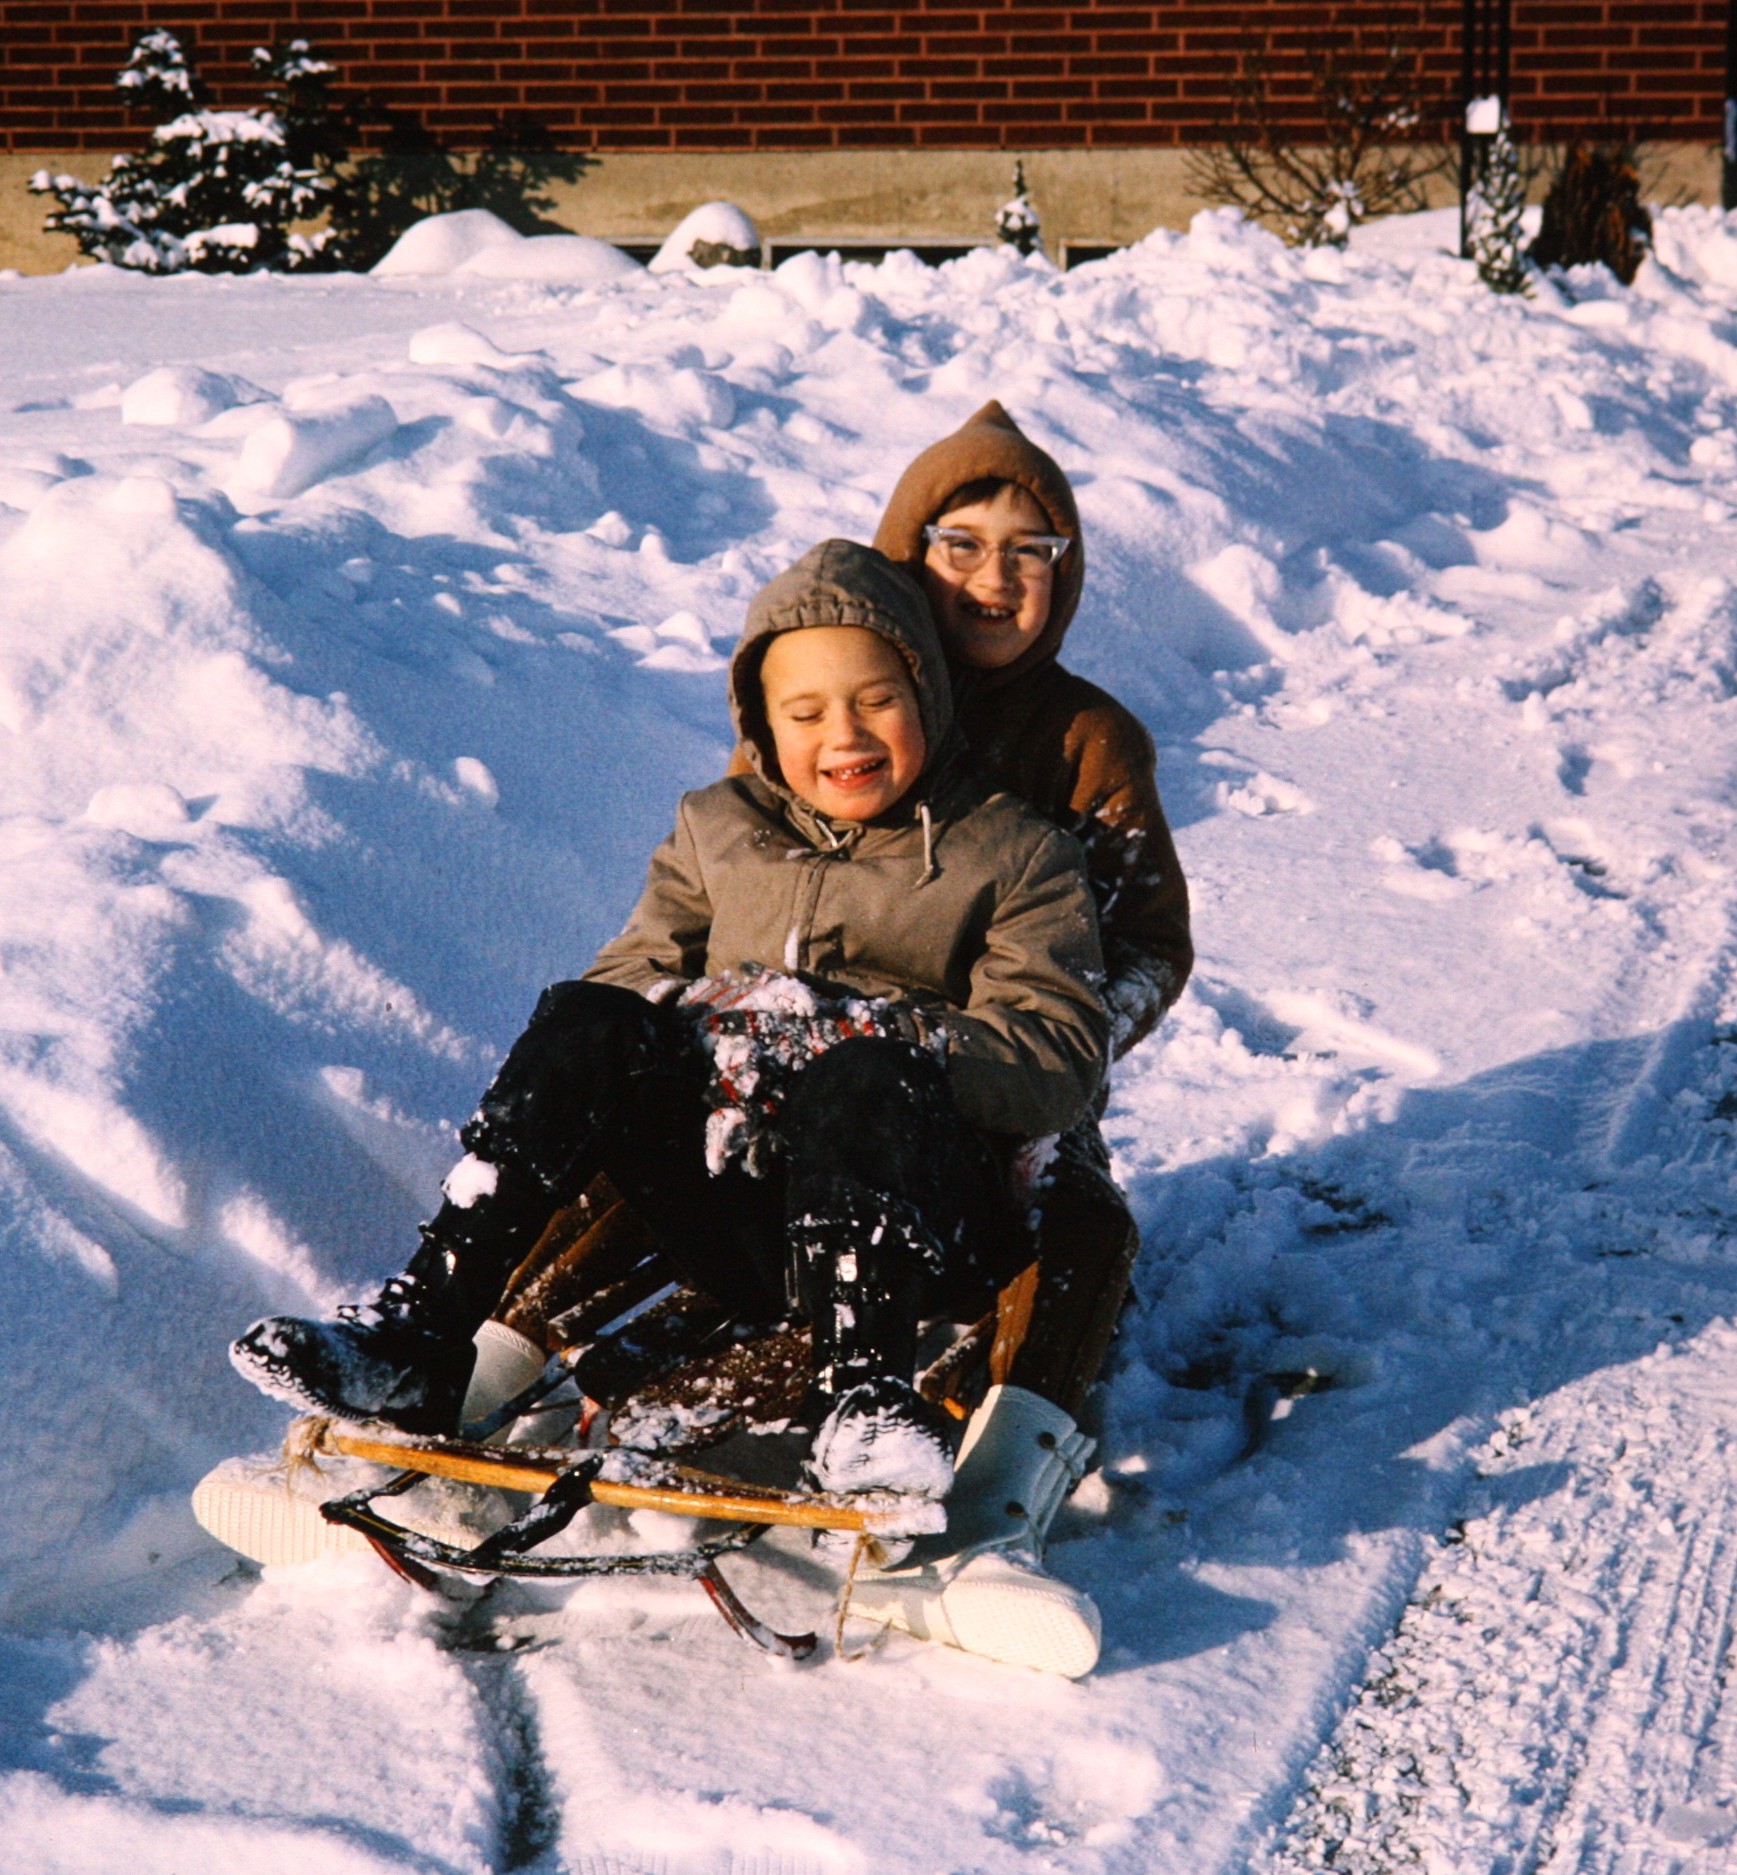 My brother and me in Richland, when it would have been nice to have a snow day